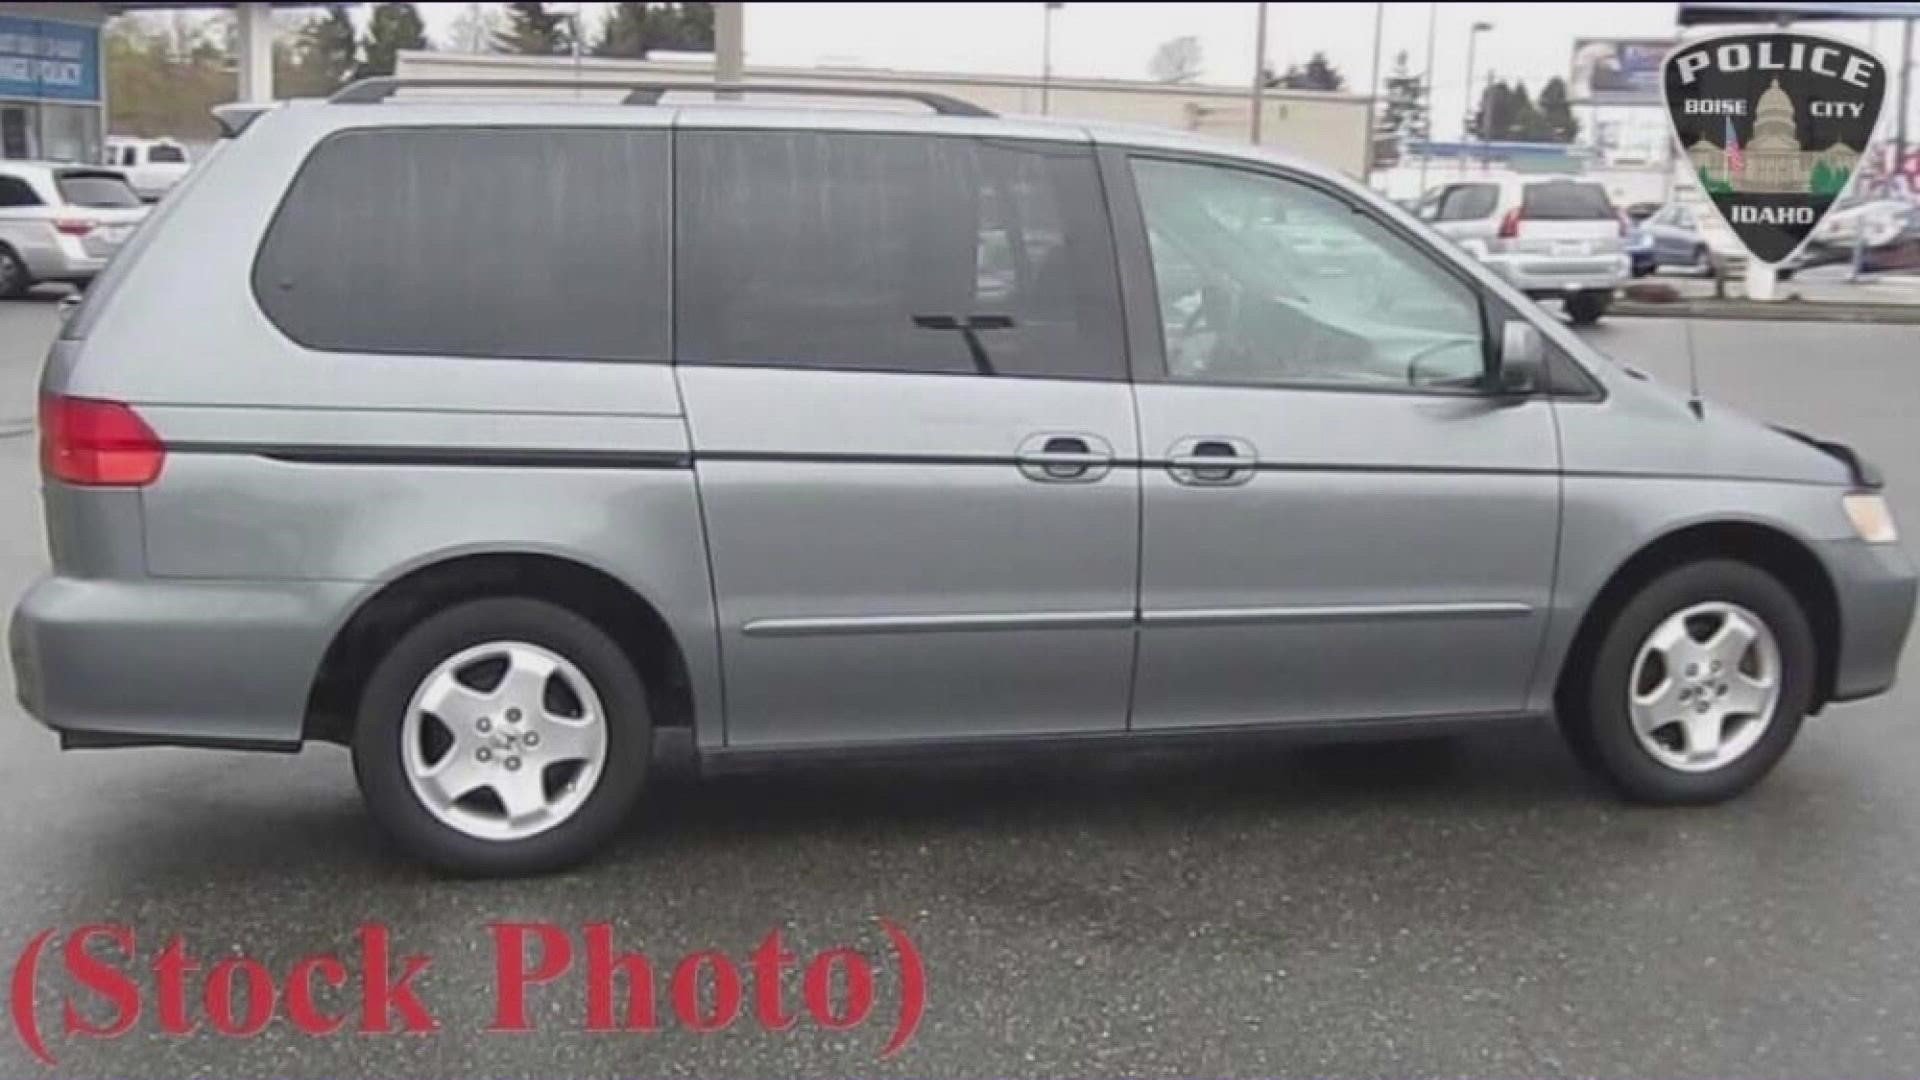 Police are asking the public if they have seen a 2001 medium gray Honda Odyssey in connection to a shooting in the Columbia Village area Monday, Nov. 21.